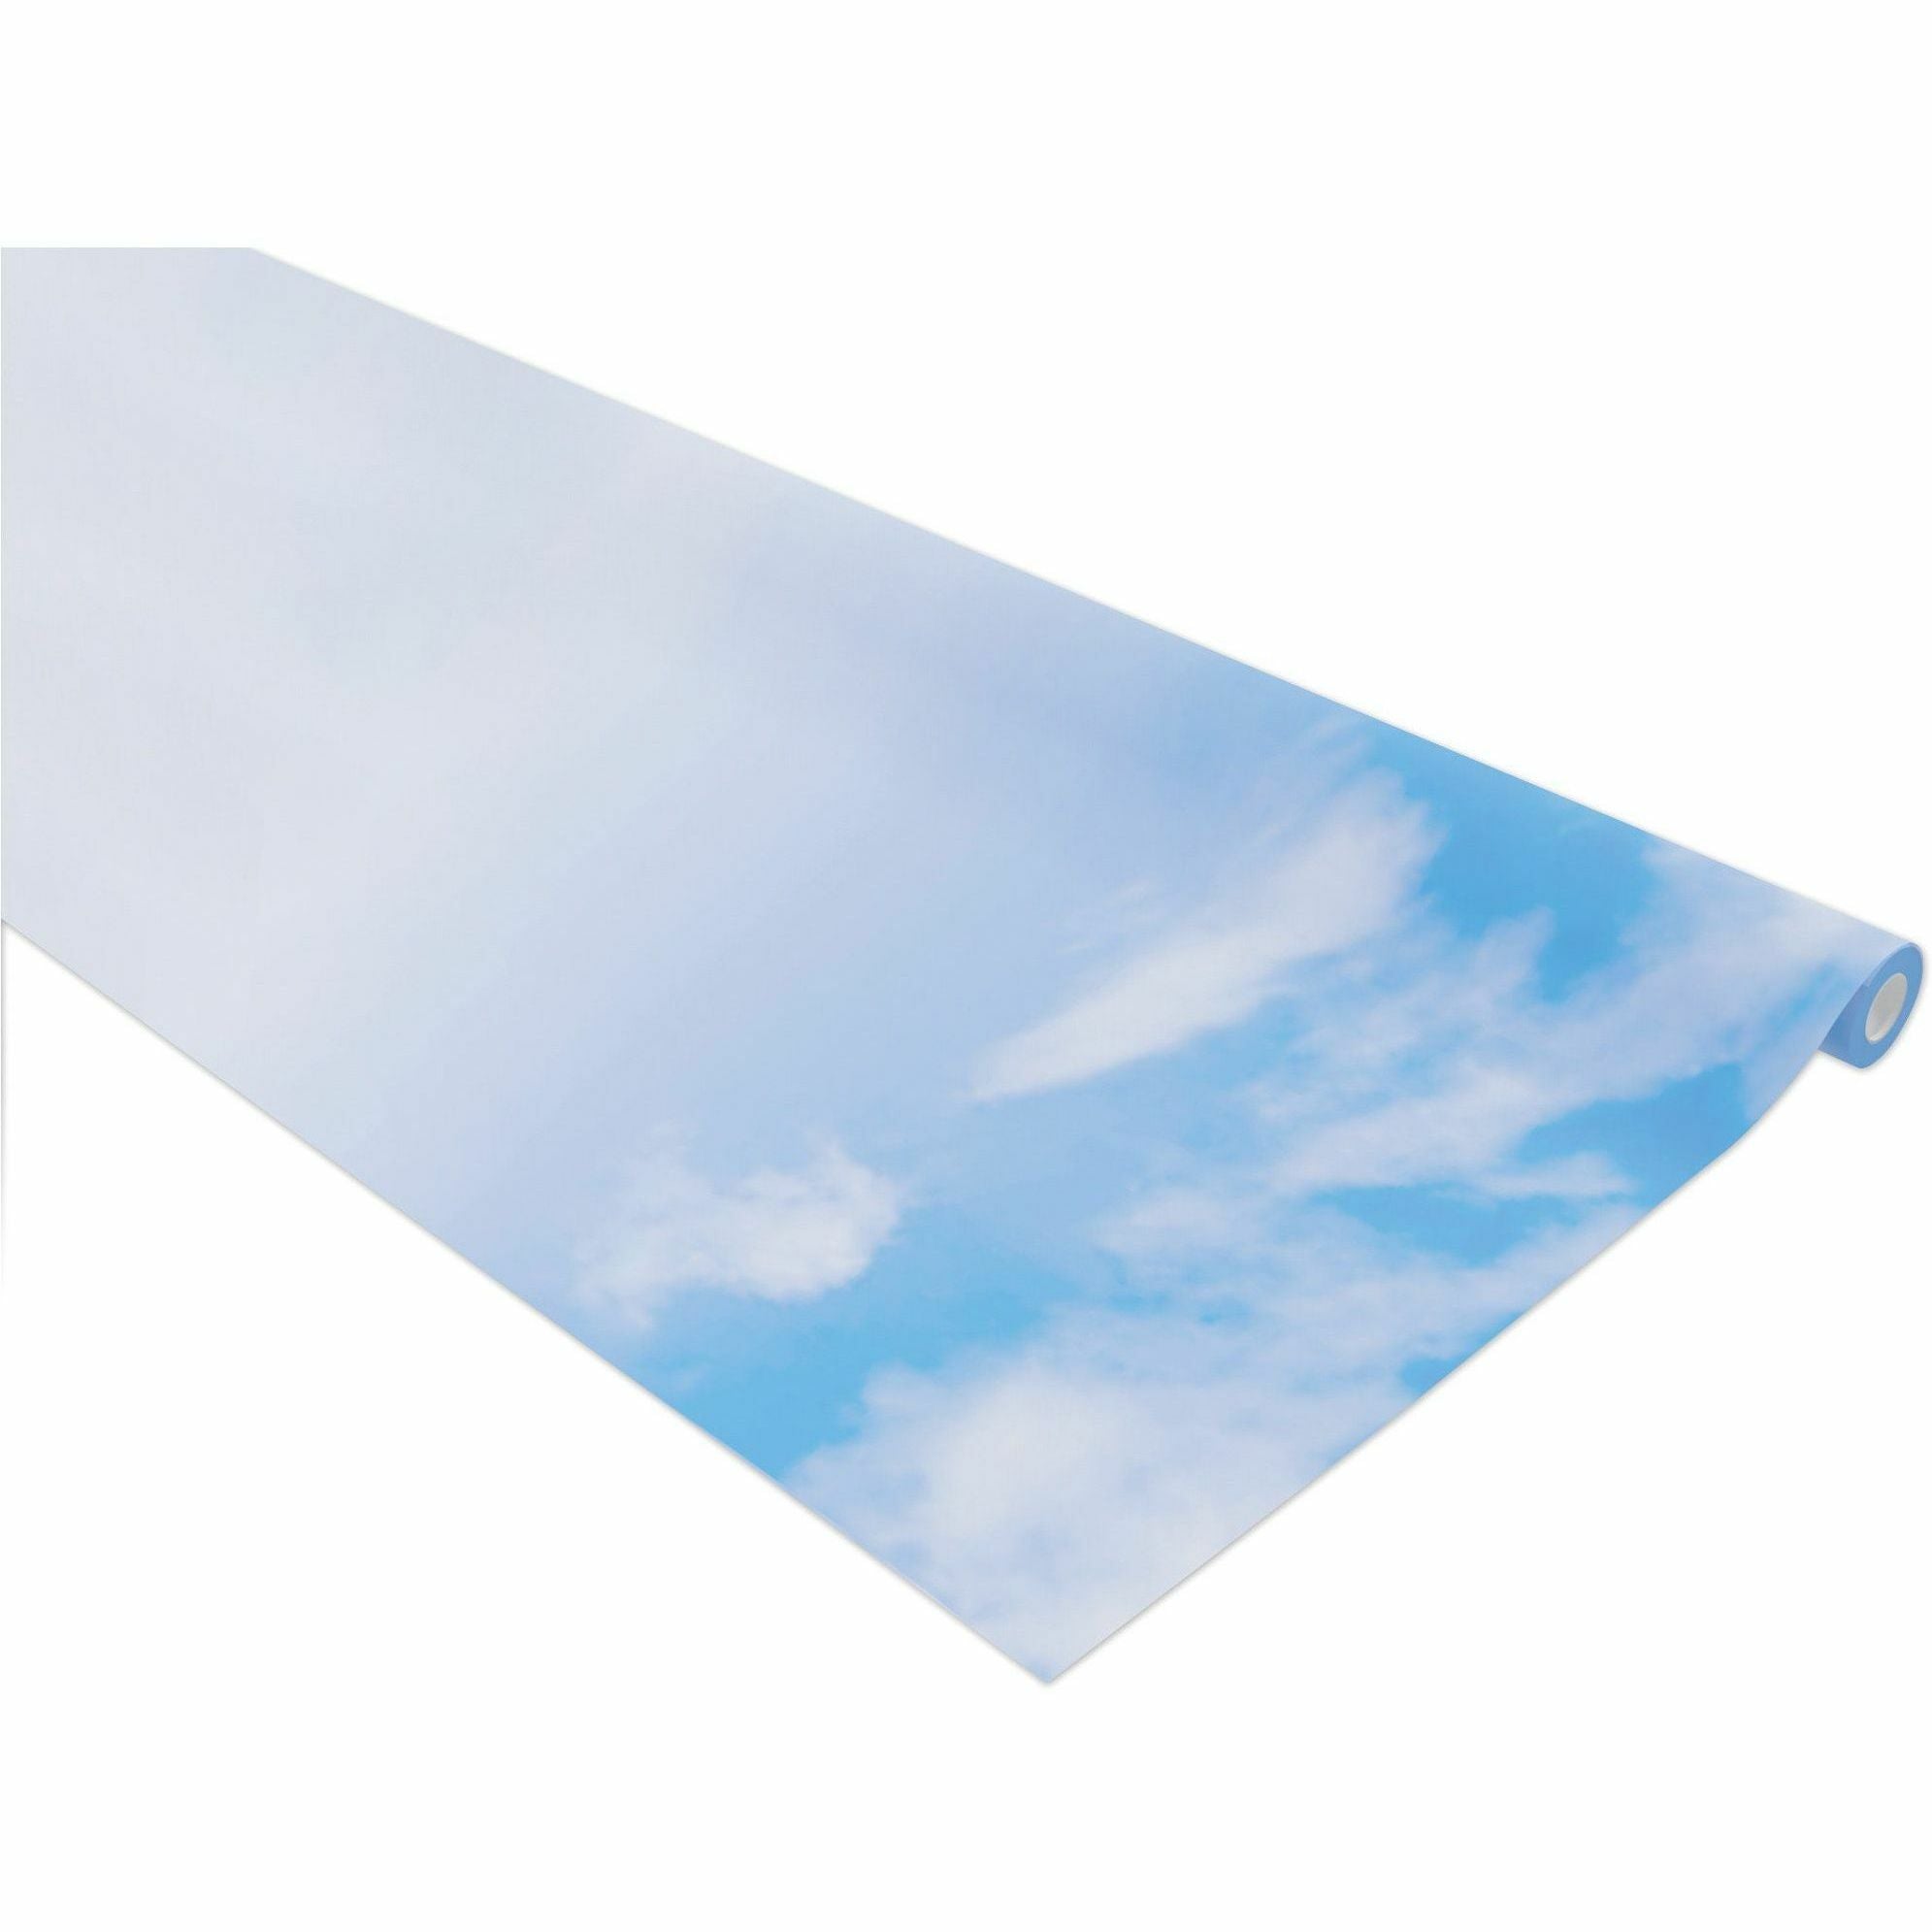 fadeless-bulletin-board-paper-rolls-classroom-door-file-cabinet-school-home-office-project-display-table-skirting-party-decoration-48width-x-50-ftlength-1-roll-wispy-clouds-paper_pacp0056935 - 2